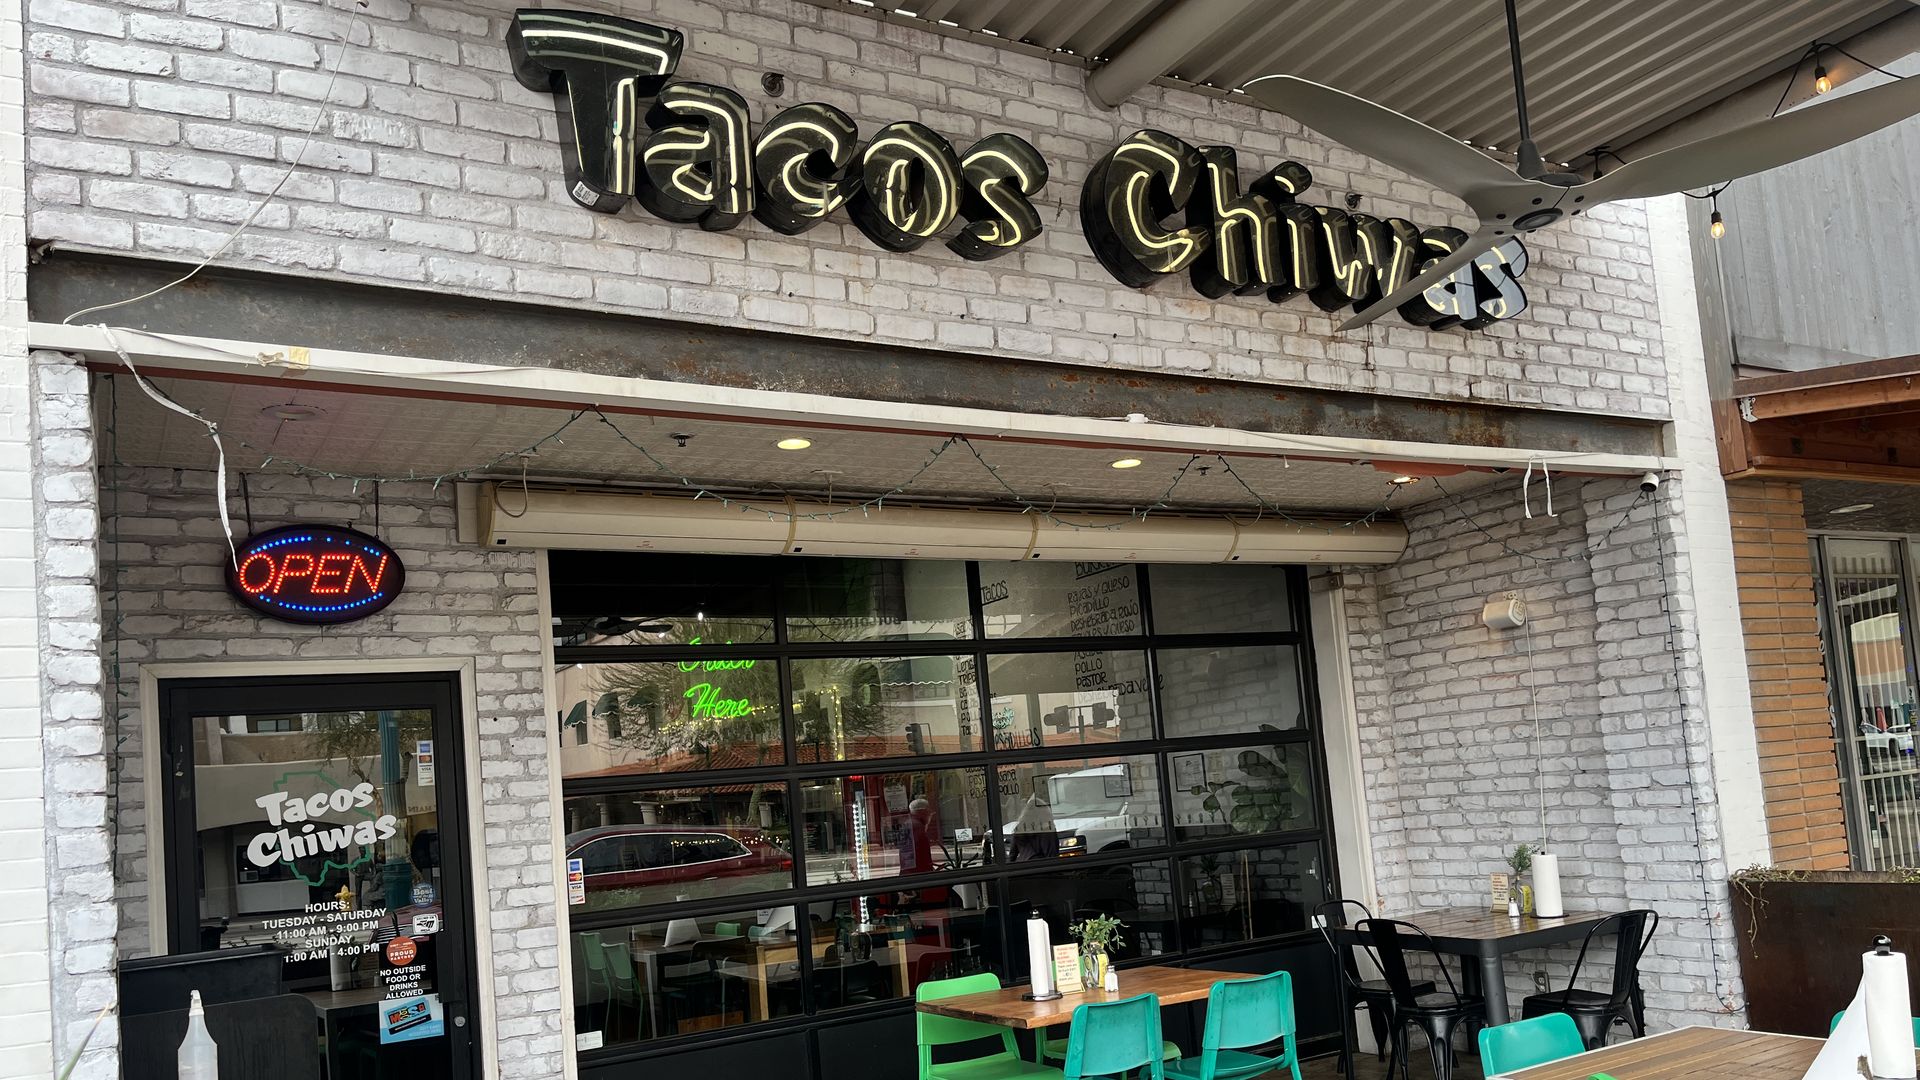 A restaurant front of Tacos Chiwas.